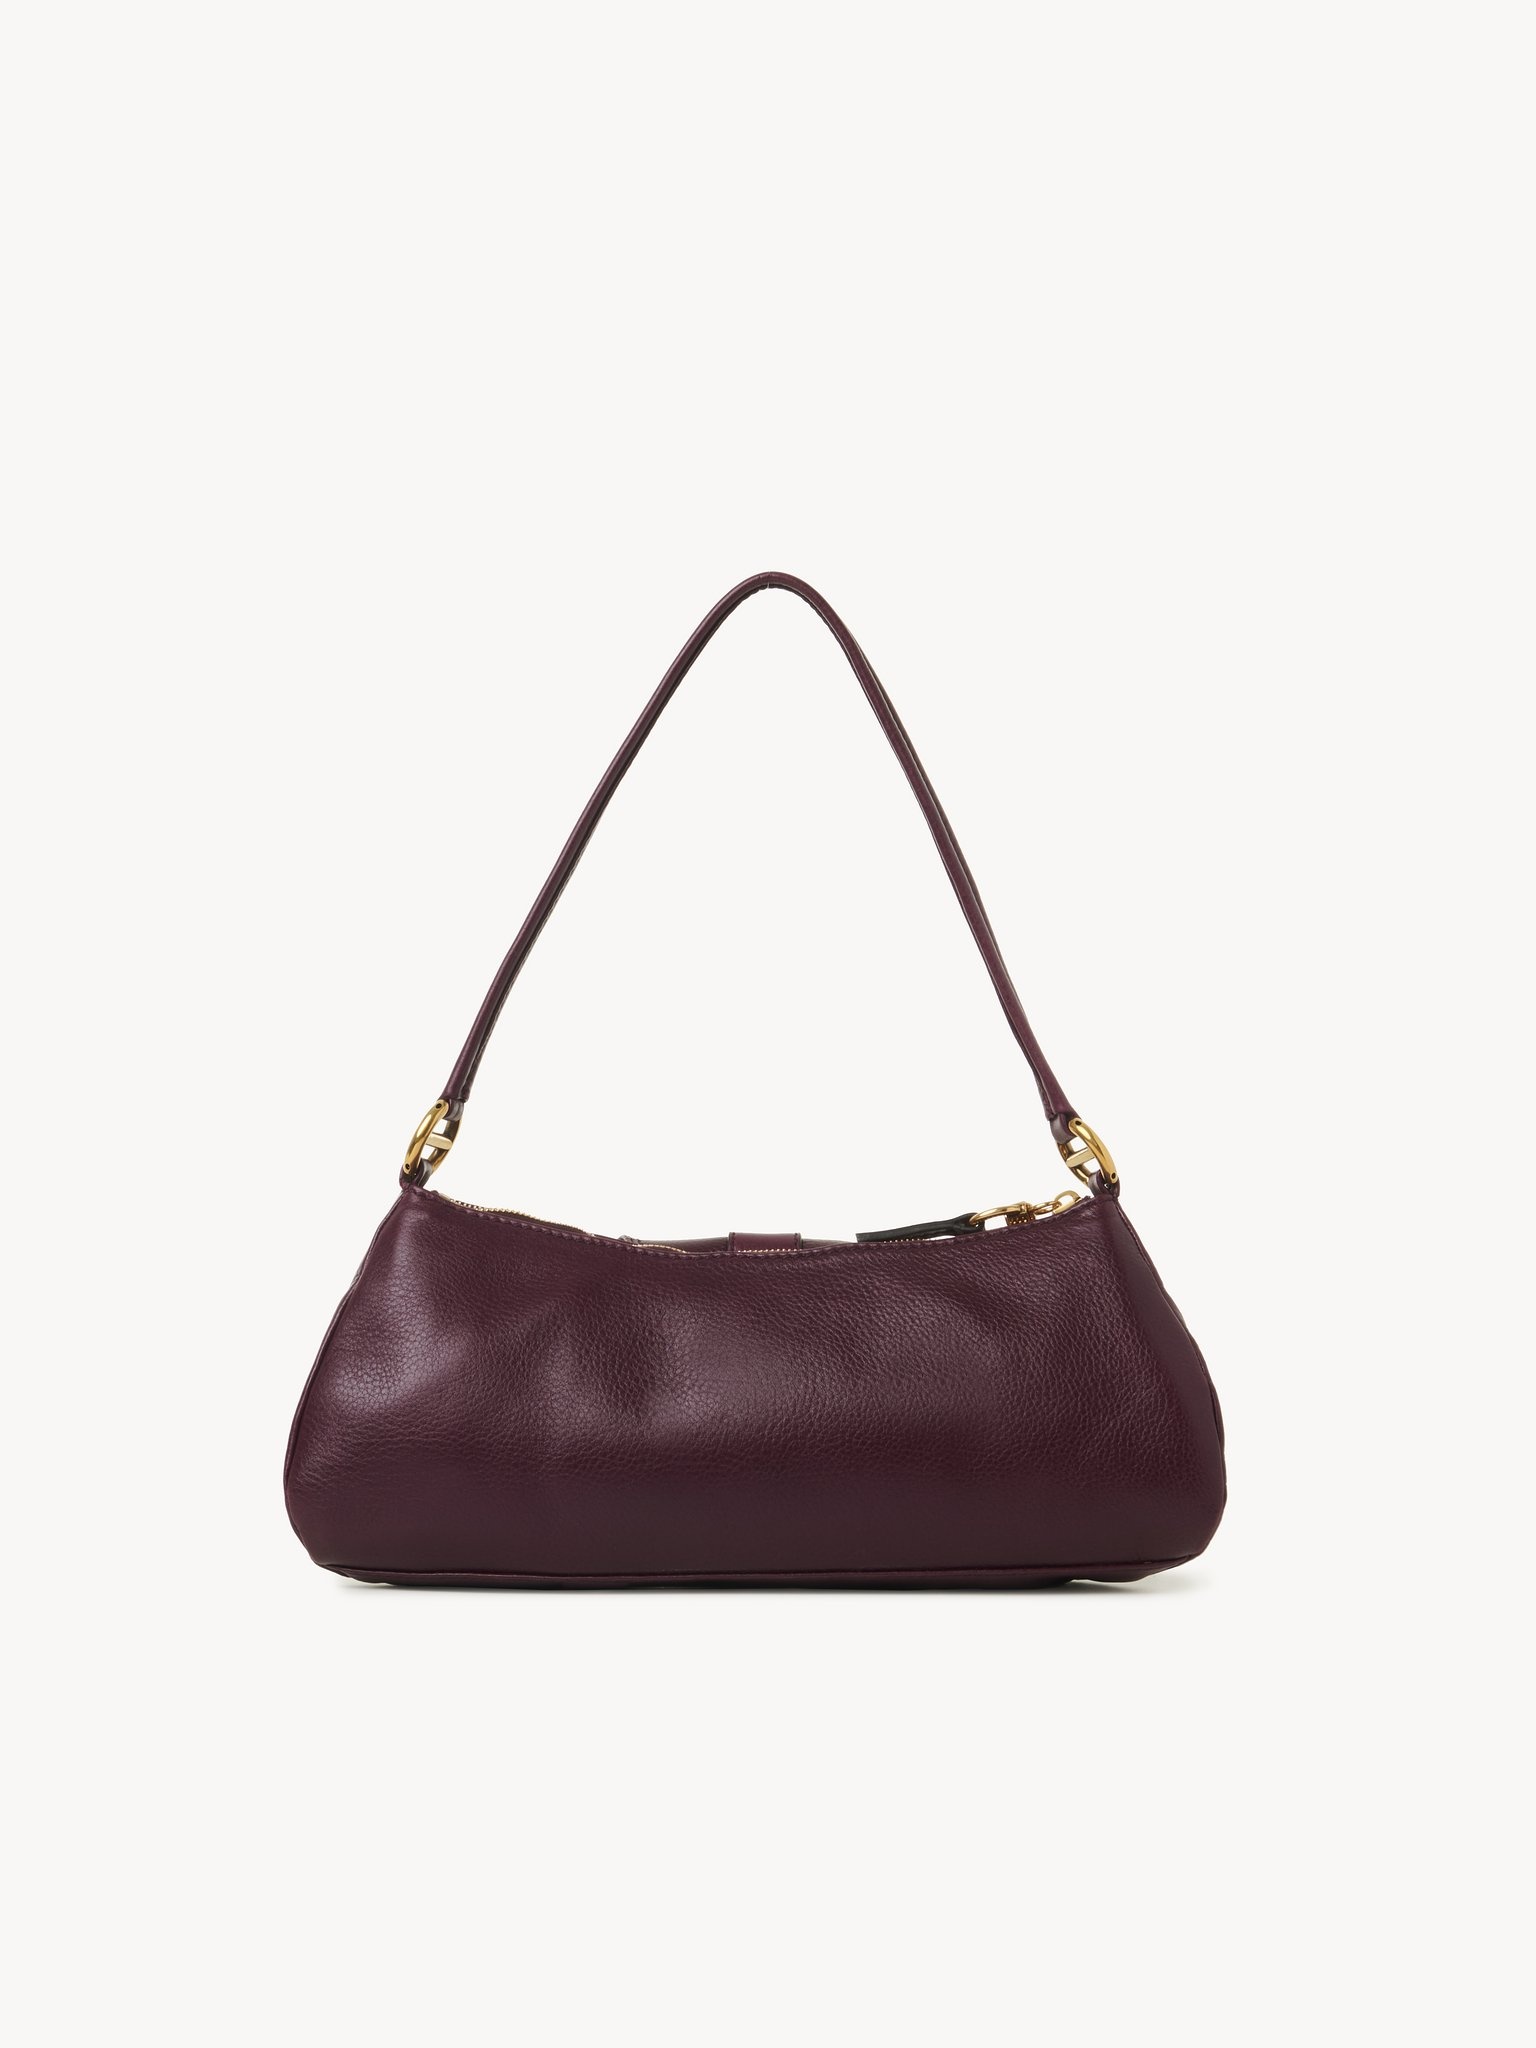 THE 99 SHOULDER BAG IN GRAINED LEATHER - 4